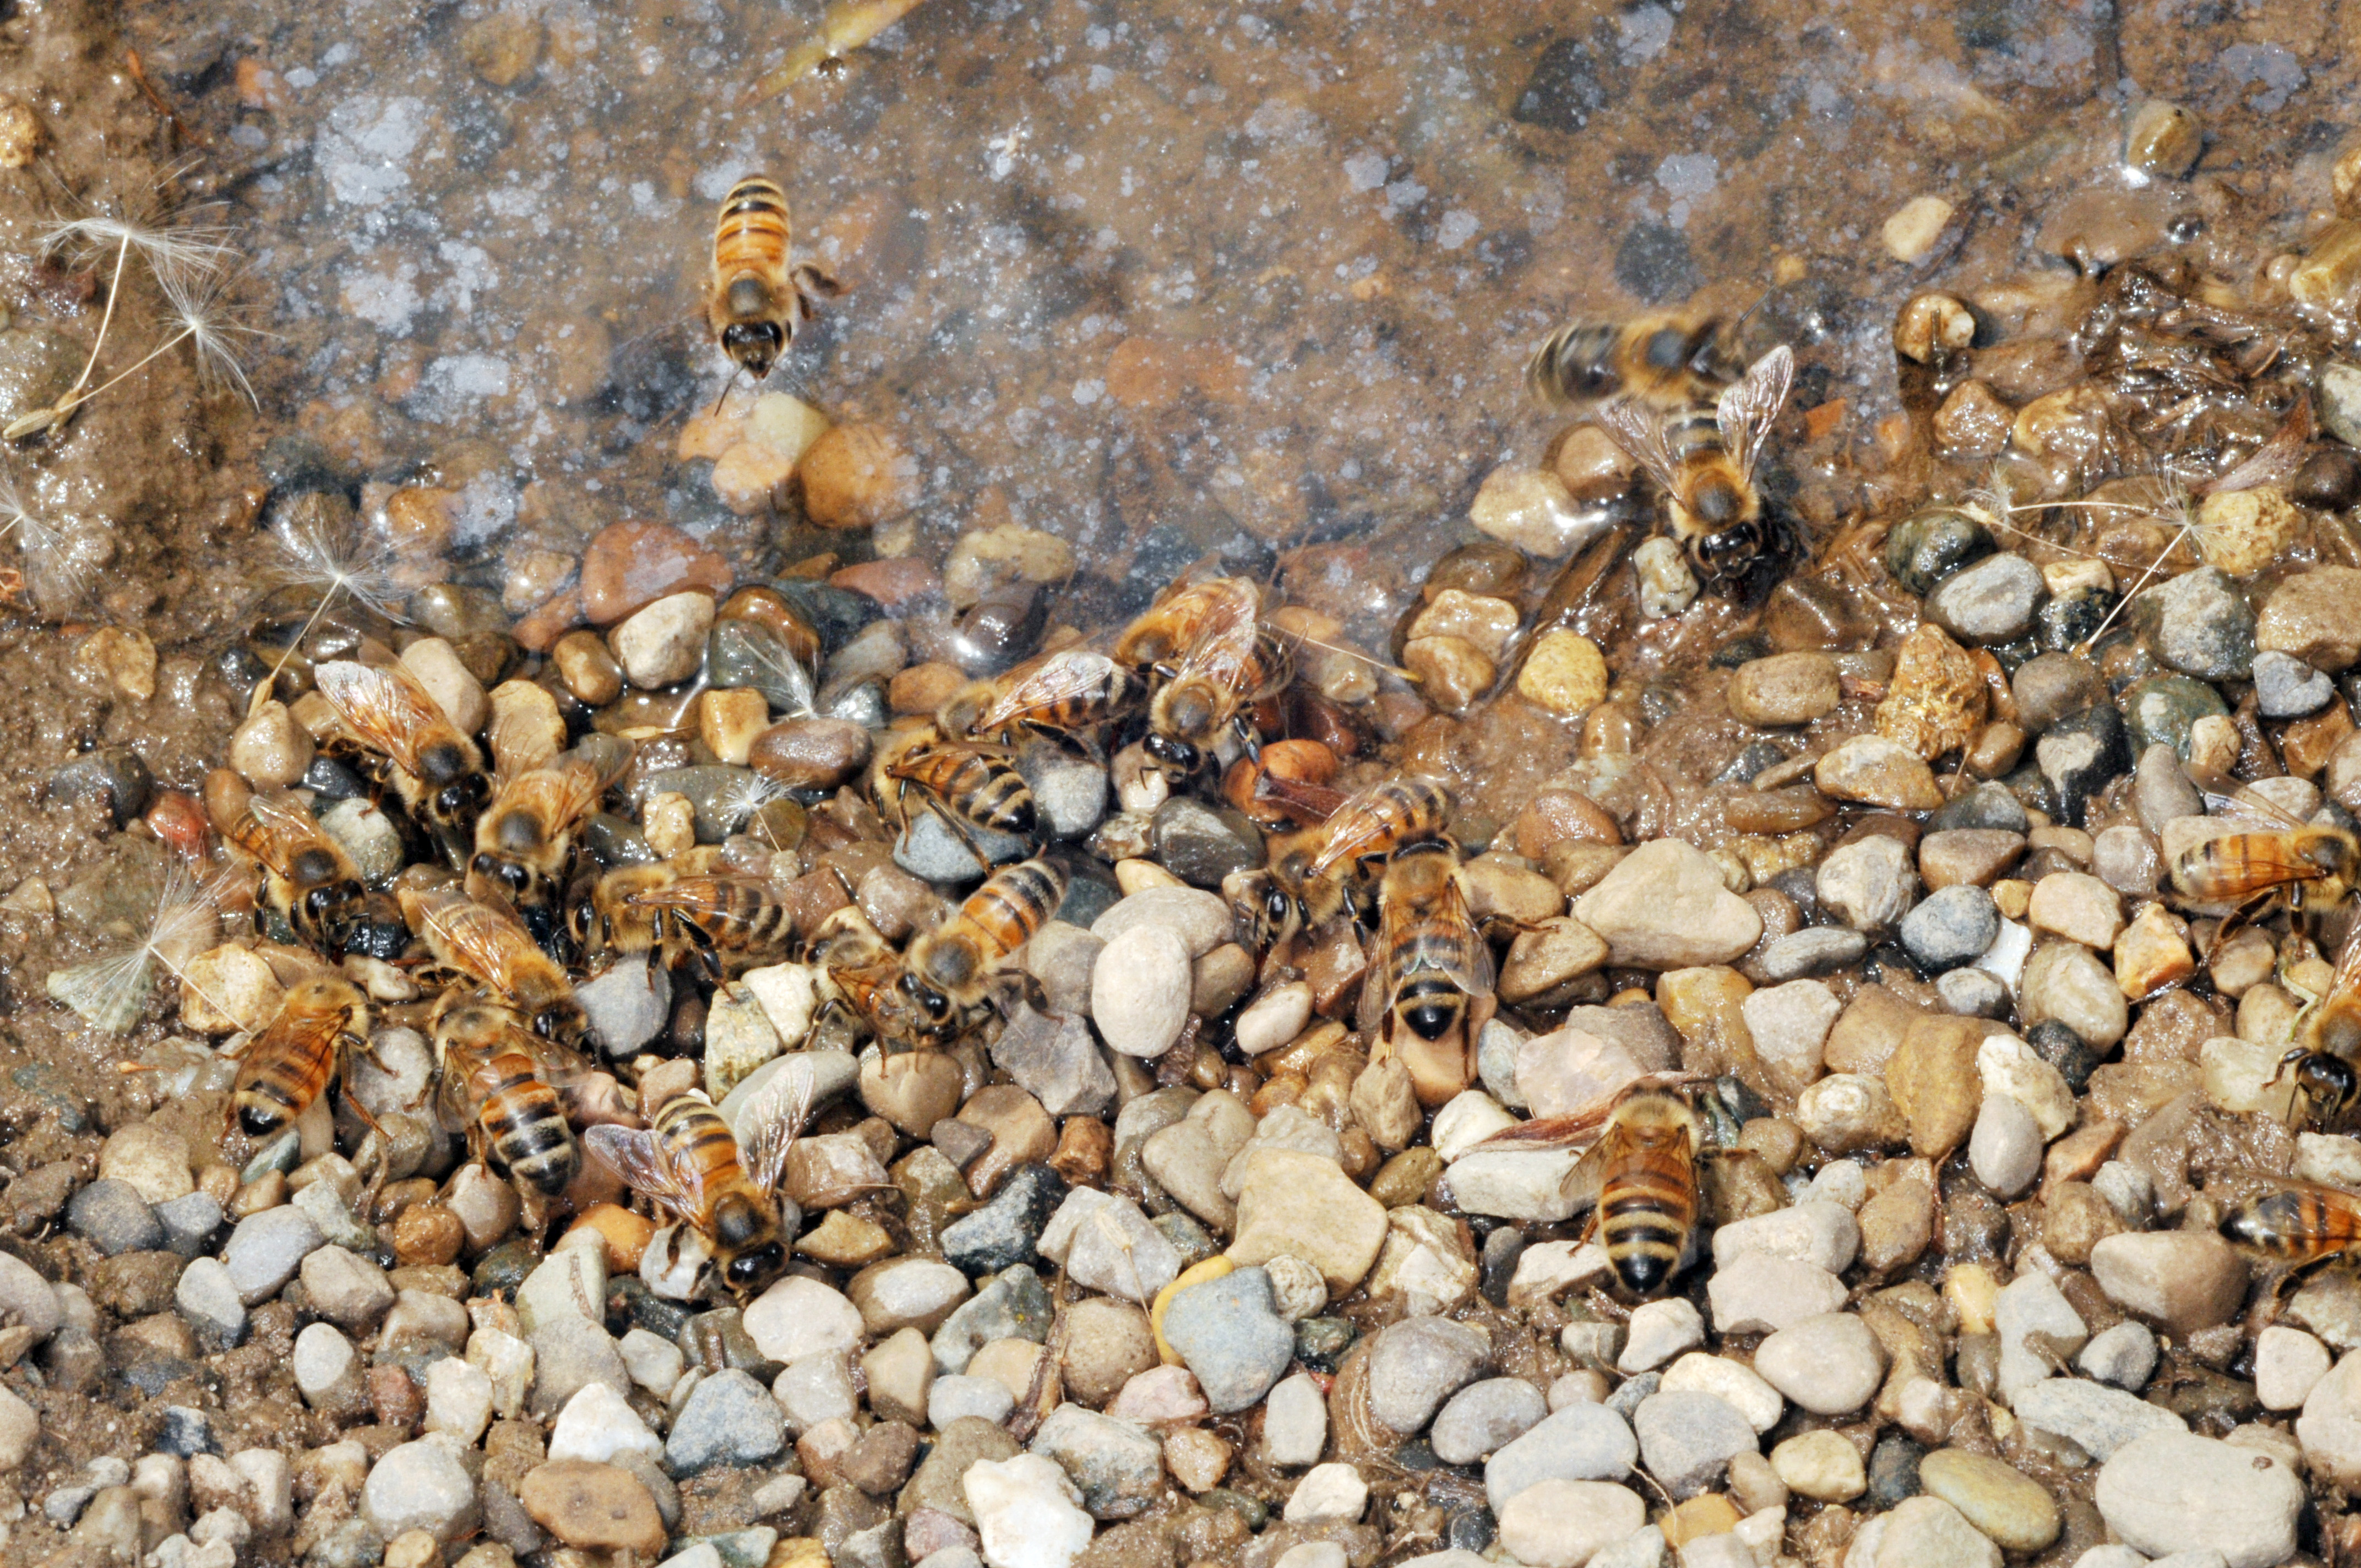 Honey bees often prefer stagnant pools for drinking water.